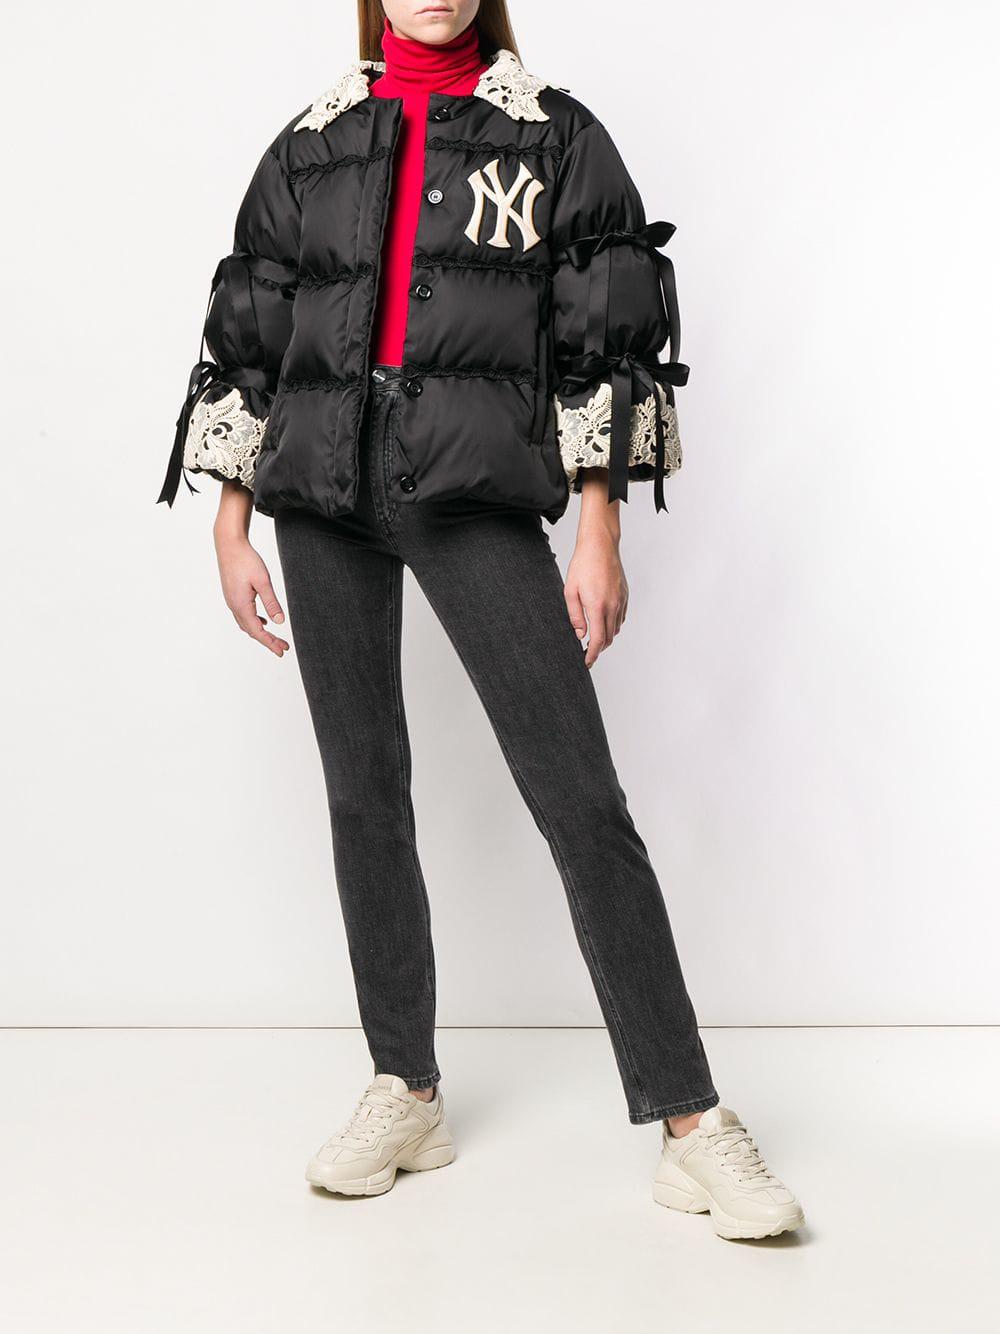 Gucci Jacket With Ny Yankees Patch, $1,892, farfetch.com